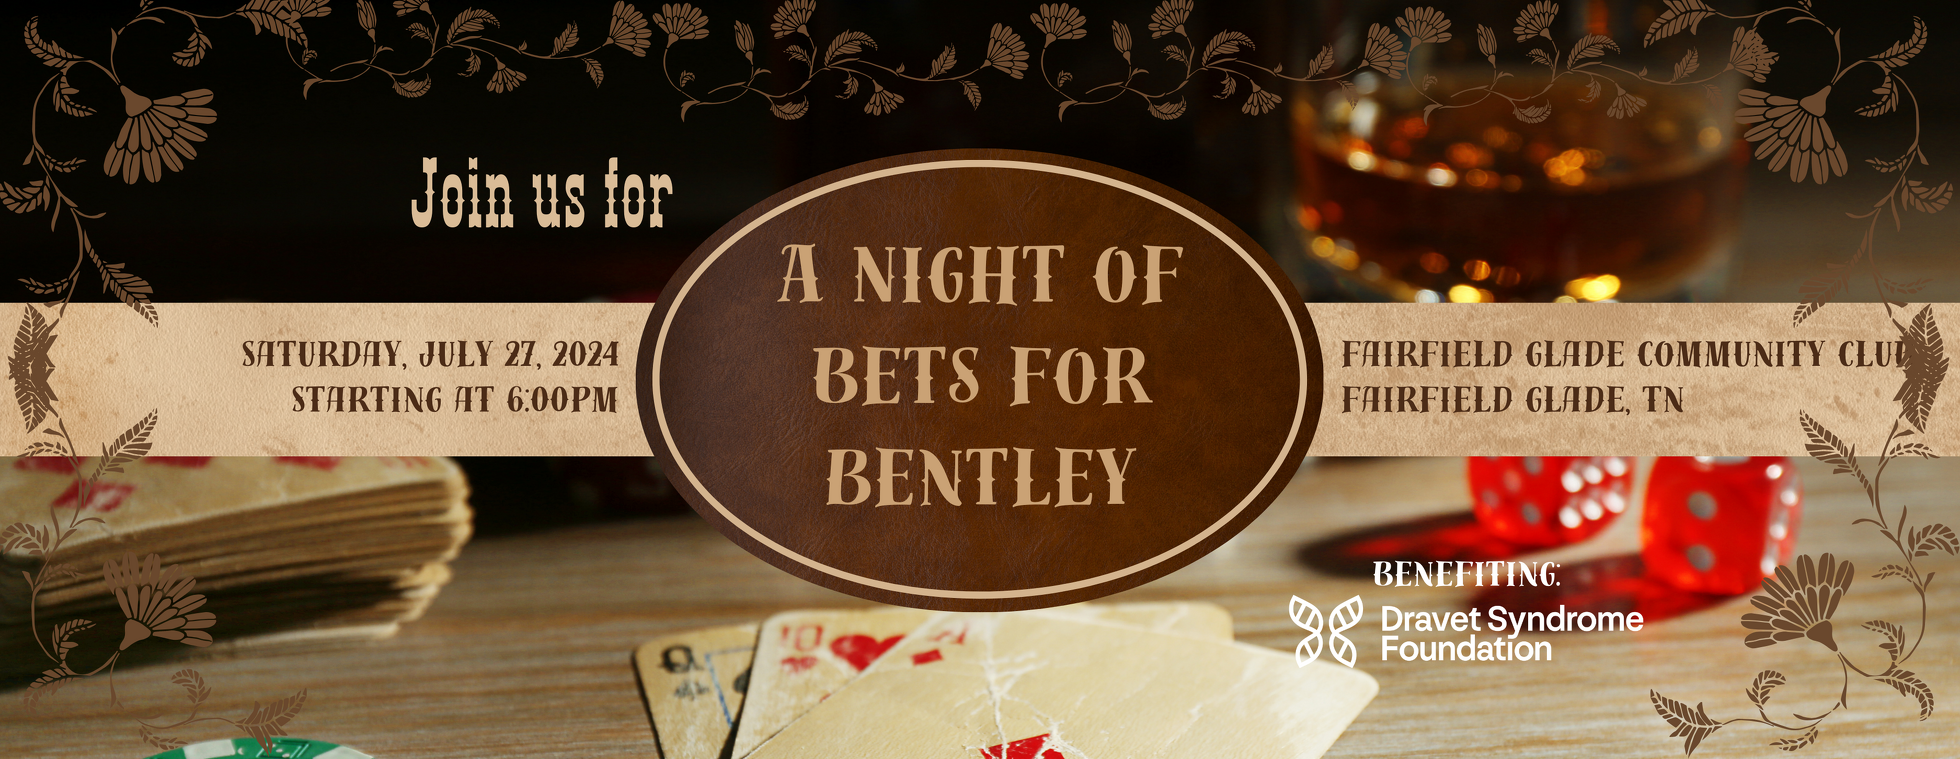 A Night of Bets for Bentley